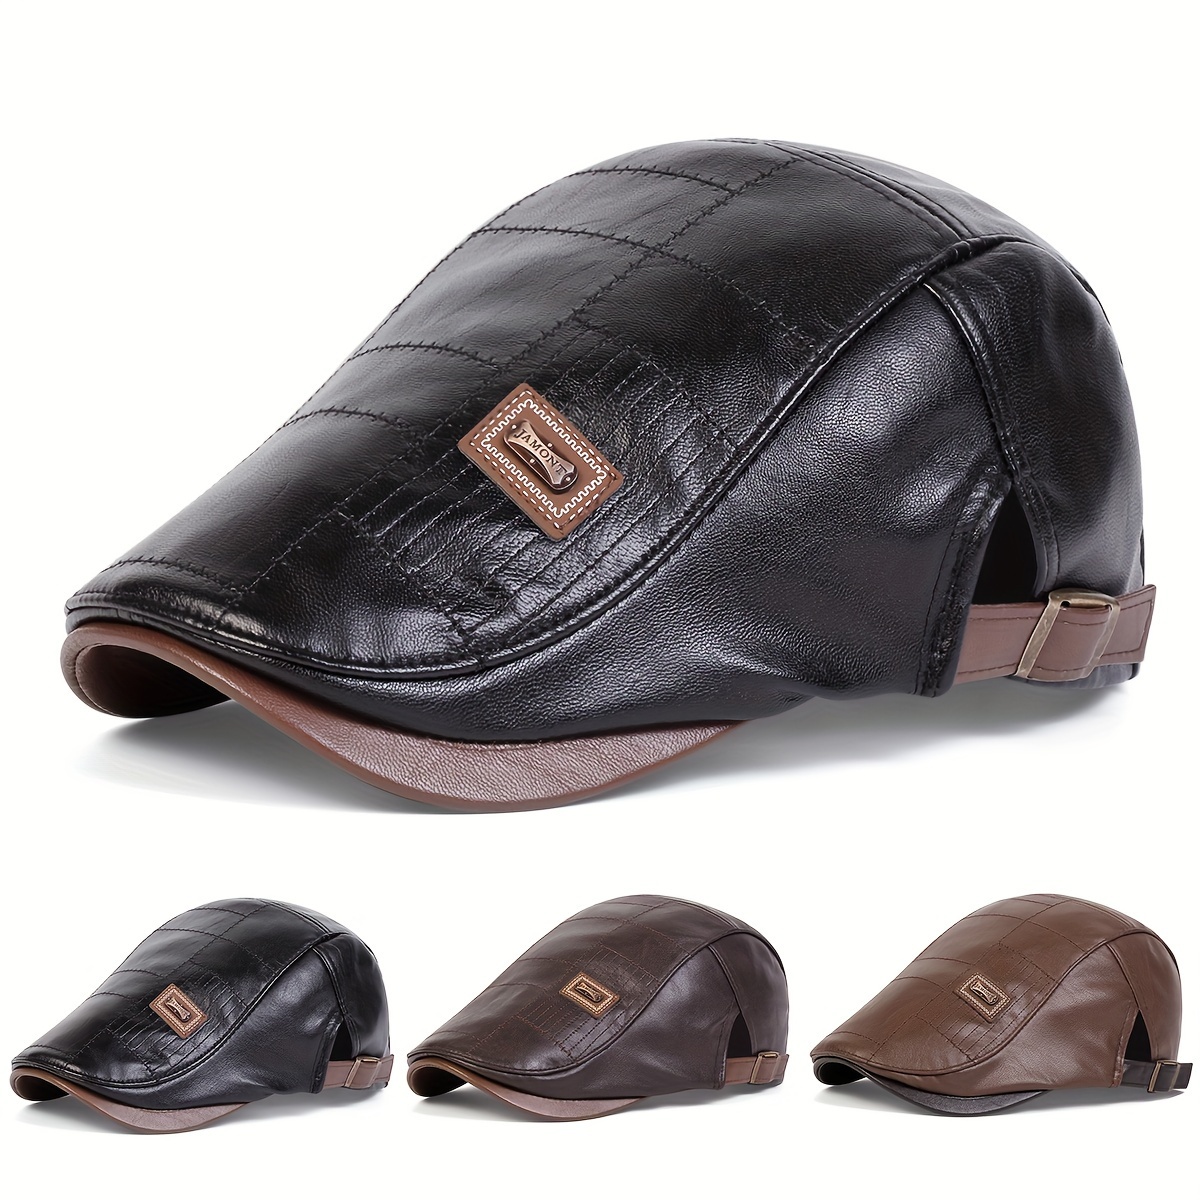 

Retro Classic Pu Leather Gentlemen Forward Hat, Adjustable Casual Beret For Autumn And Winter Travel